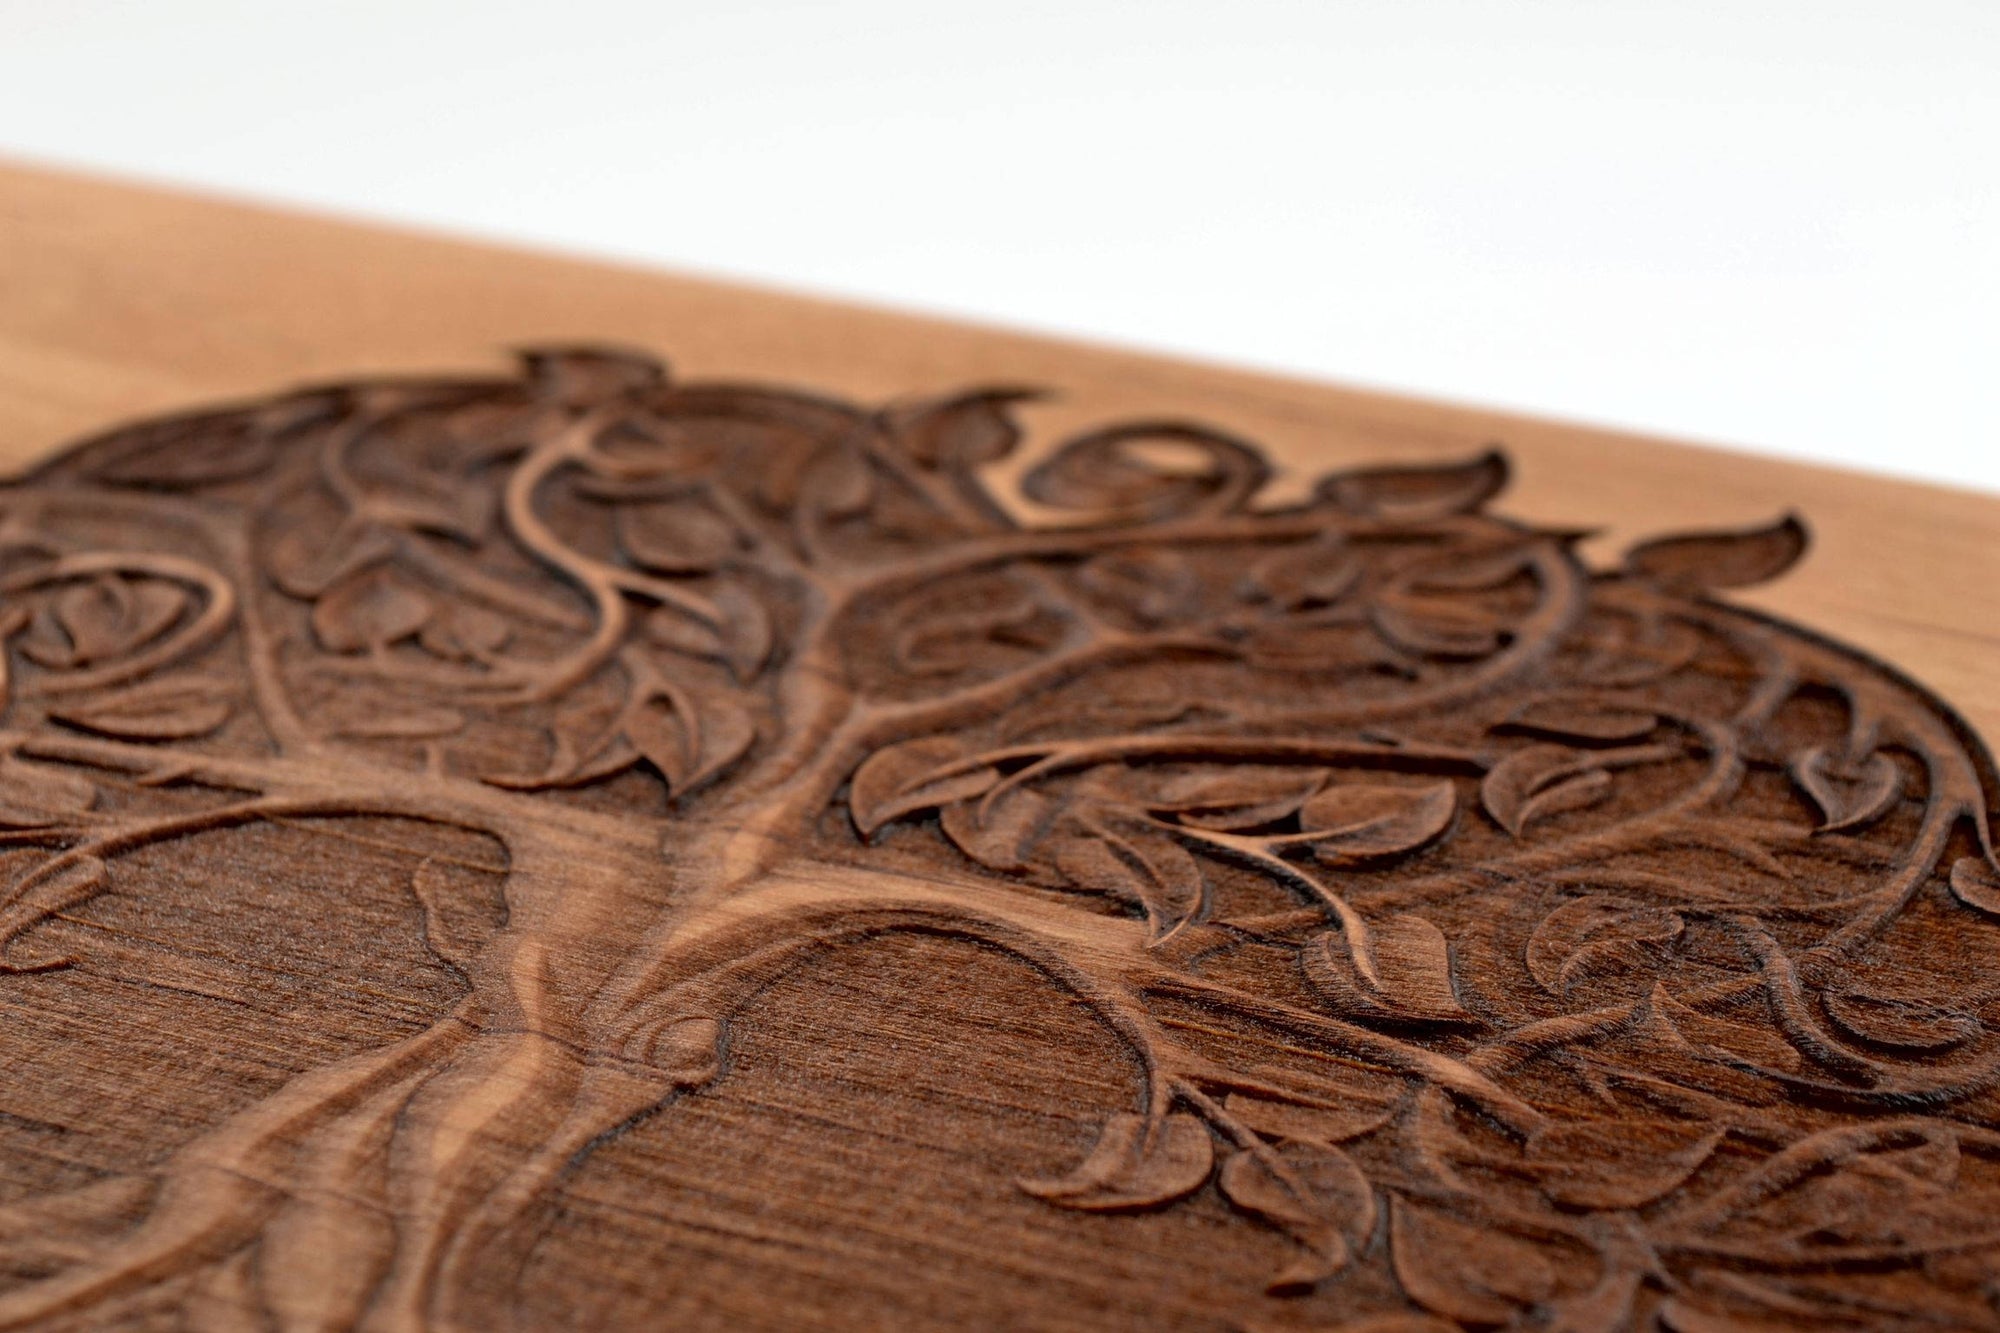 Essential Oils Storage Box-High Detail Engraving in Celtic & Baroque D -  Designer Bee of New England